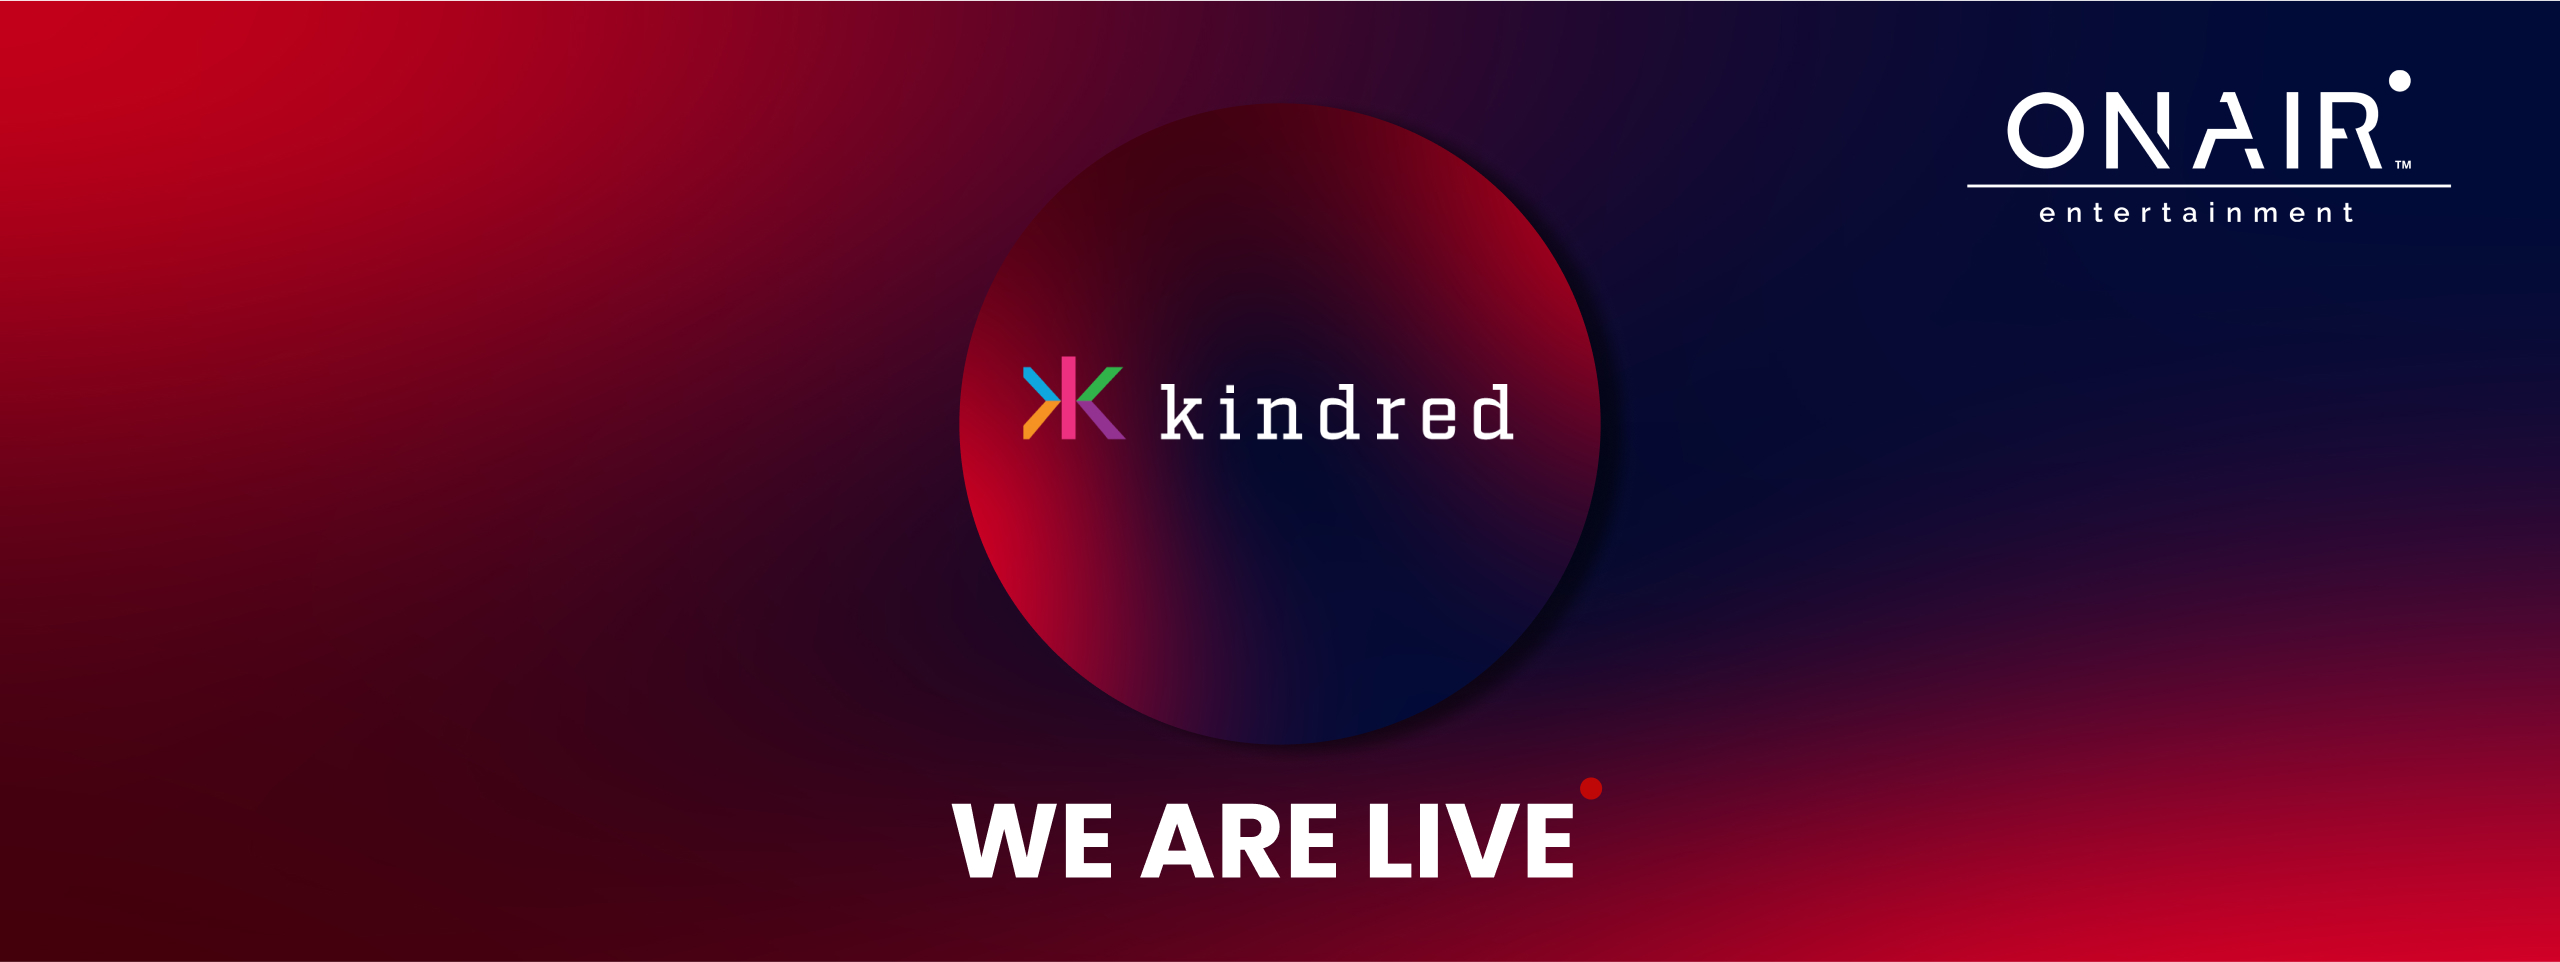 Kindred logo, representing their partnership agreement with OnAir Entertainment.